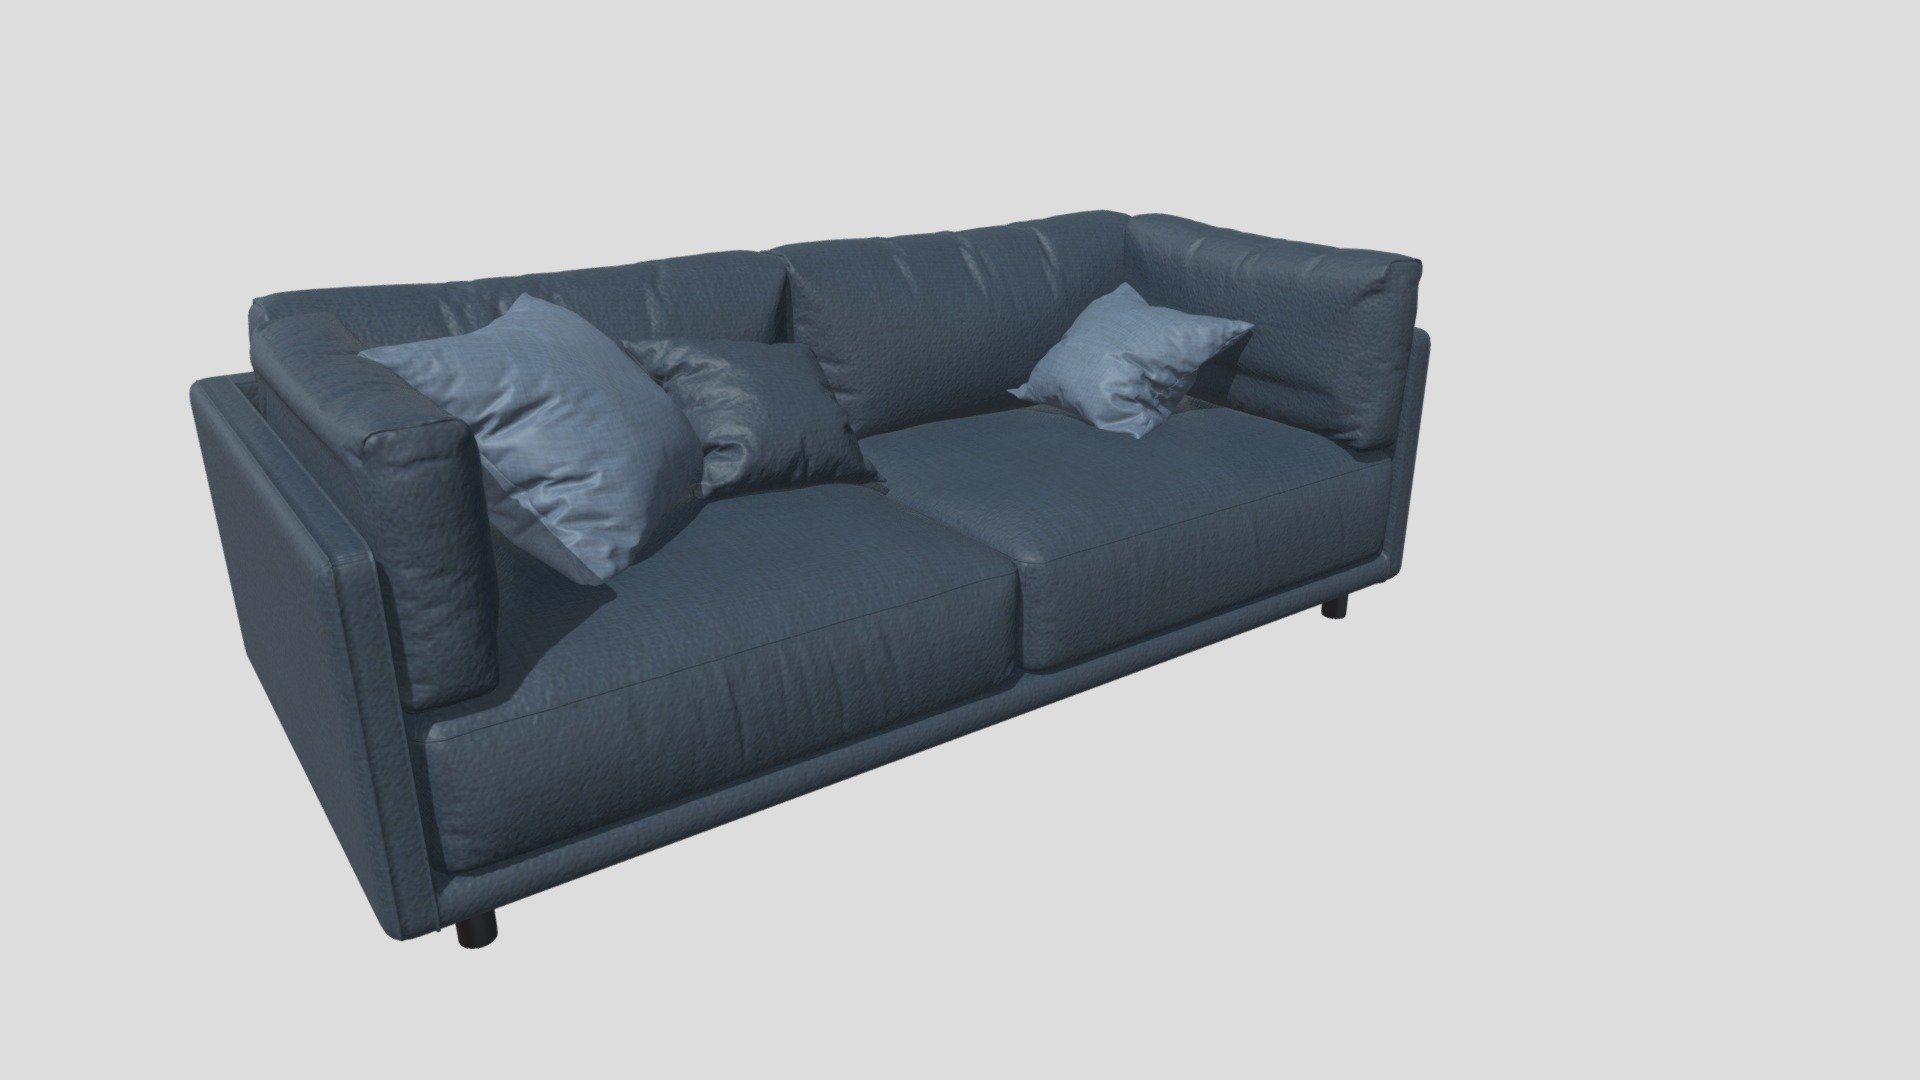 Name: Sofa 159
Version: 2018
Units: Millimeters
Polys: 159,505
Render: Corona, Vray
Formats: 3Ds Max 2018,OBJ,fbx - Sofa 159 - Buy Royalty Free 3D model by Augusto.Angulo 3d model